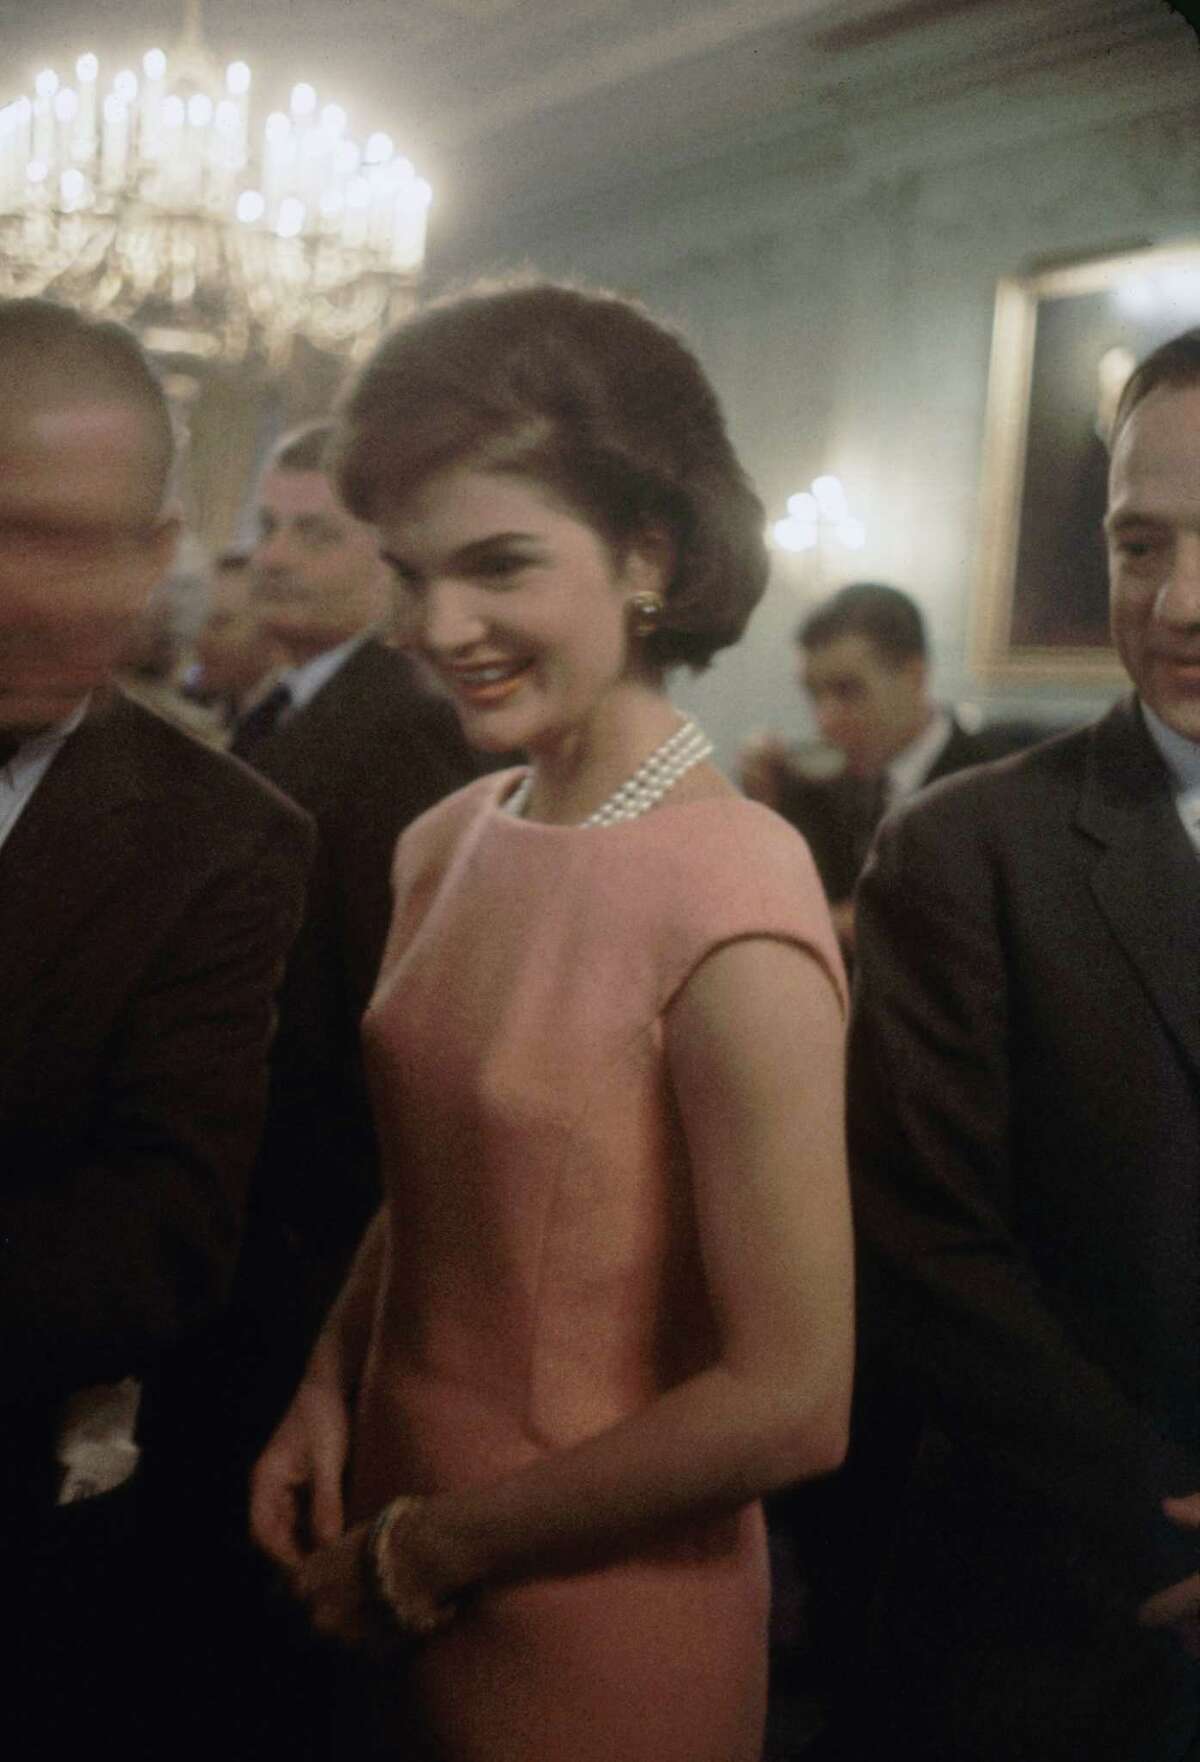 Jacqueline Kennedy She remarried in 1968, however her husband Aristotle Onassis died seven years later. Jacqueline died in Manhattan in 1994 at the age of 64 after suffering from non-Hodgkin's lymphoma.